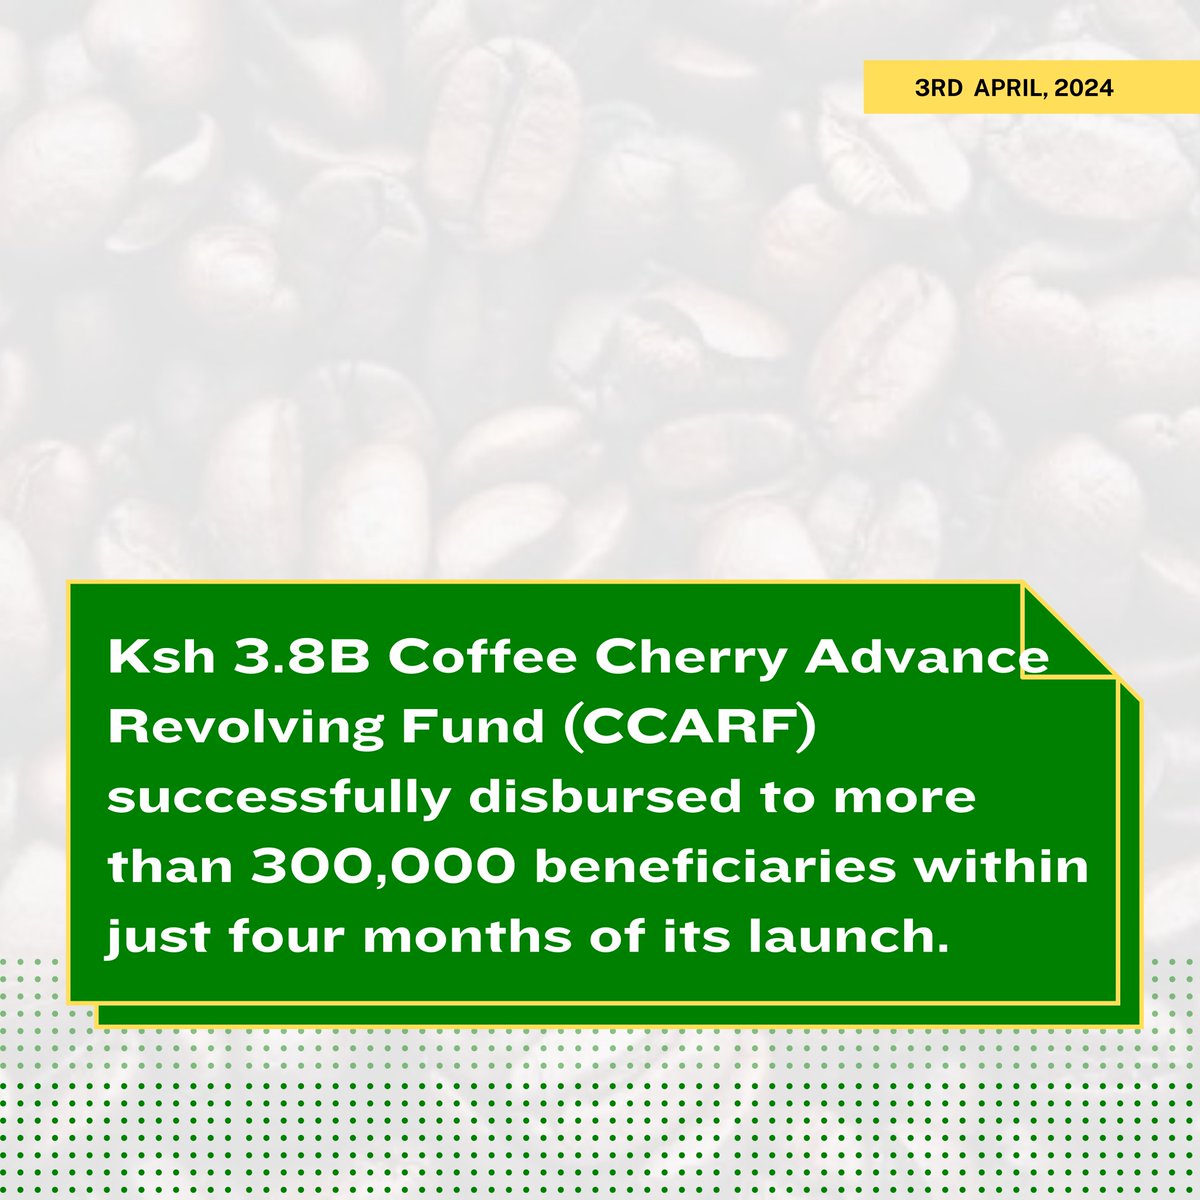 Over 300,000 beneficiaries received Ksh 3.8B from the Coffee Cherry Advance Revolving Fund (CCARF).
#RutoEmpowers #KenyaNiSisi